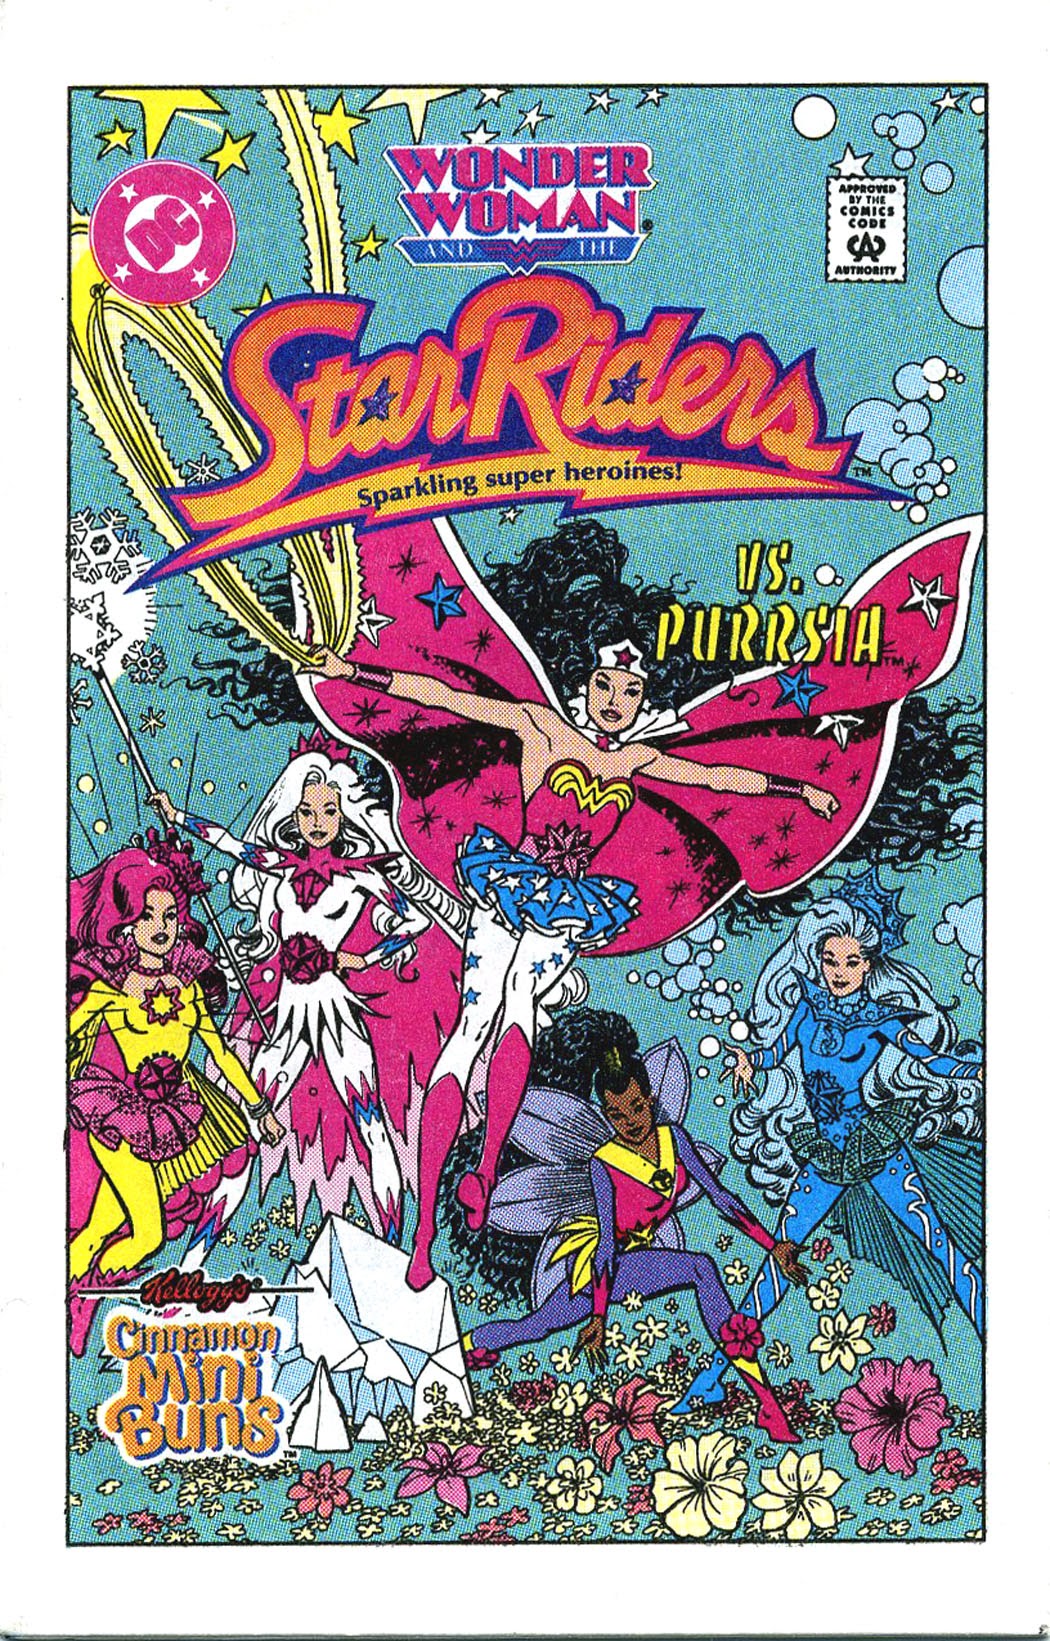 Read online Wonder Woman and the Star Riders comic -  Issue # Full - 1